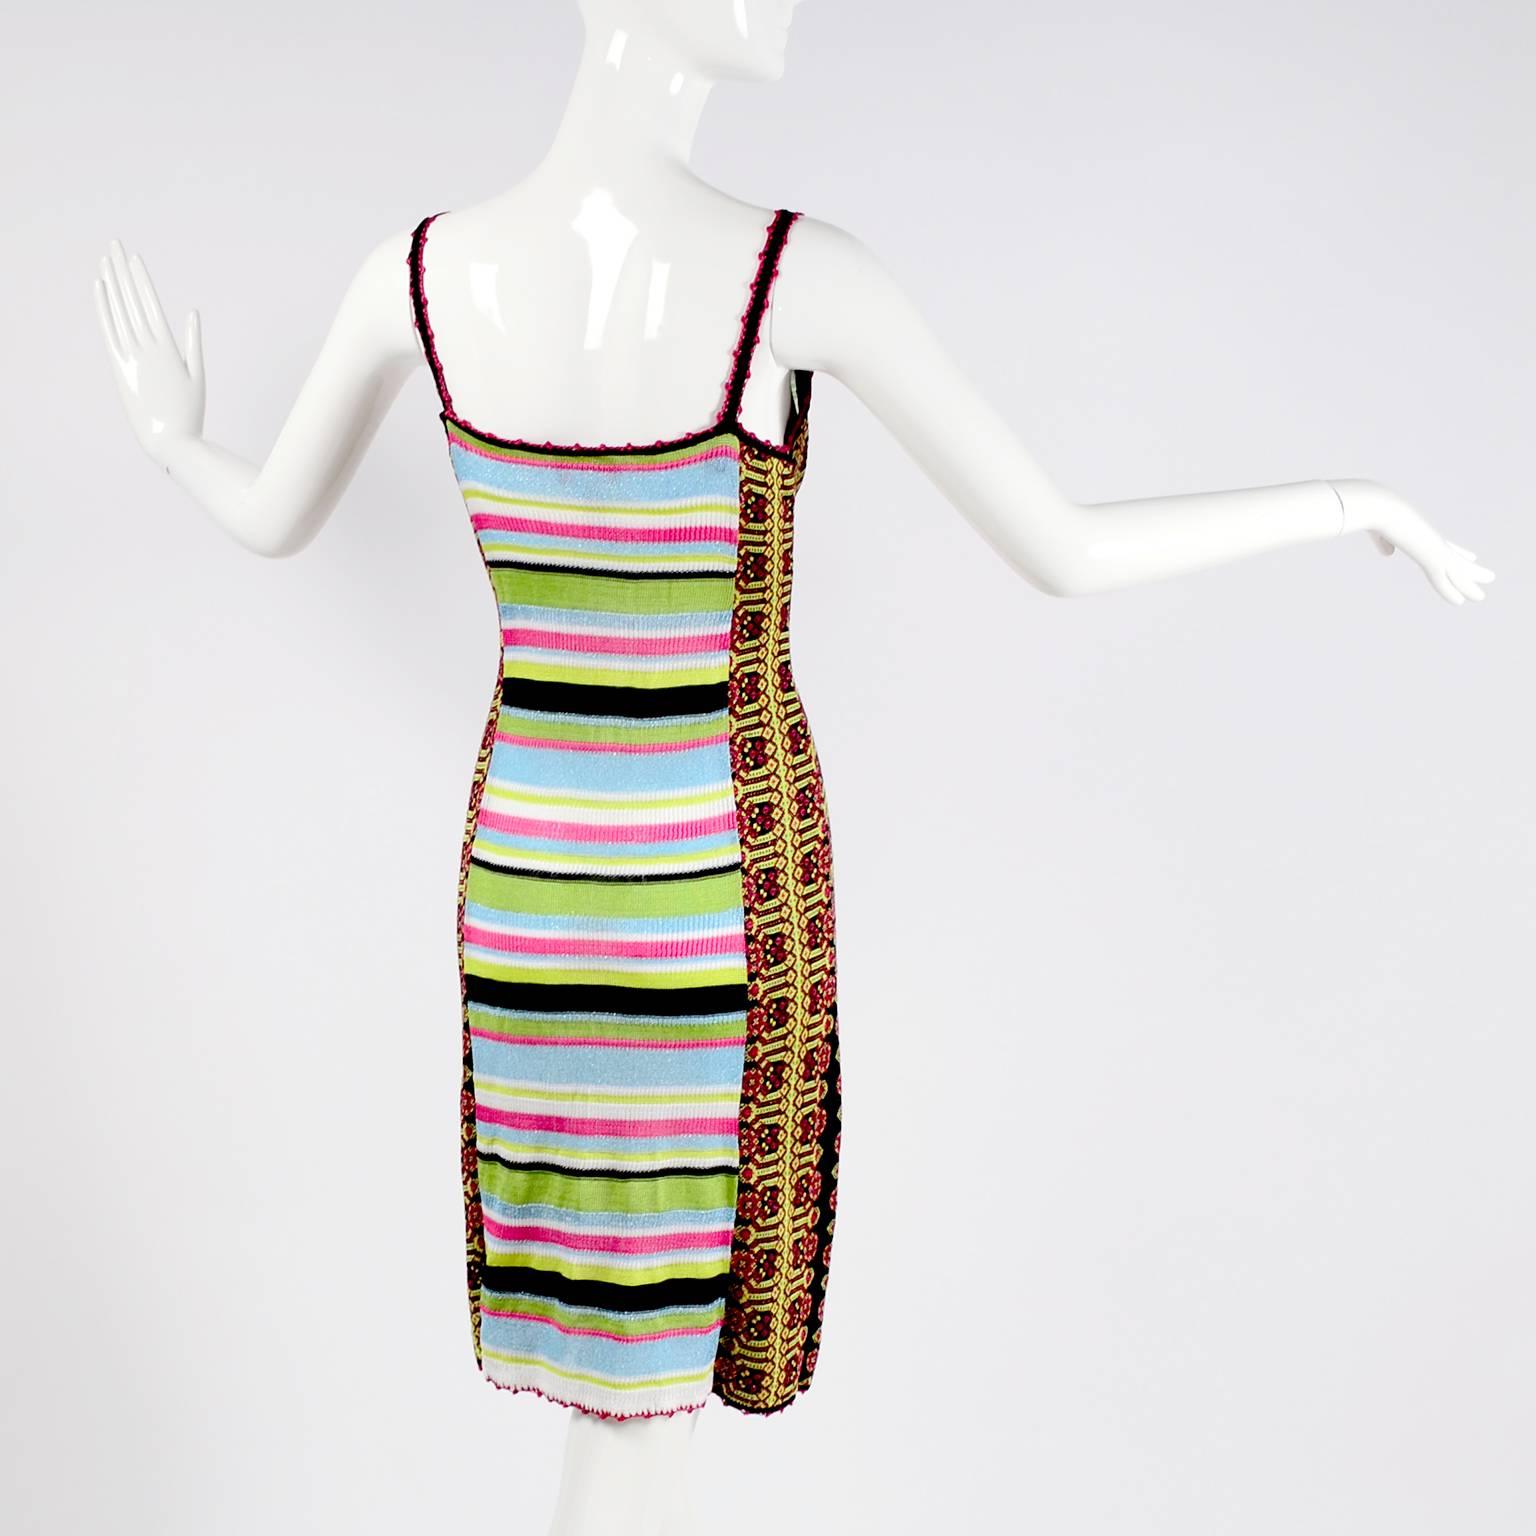 Christian Lacroix Dress in Colorful Stretch Knit With Sequins Size Medium 1